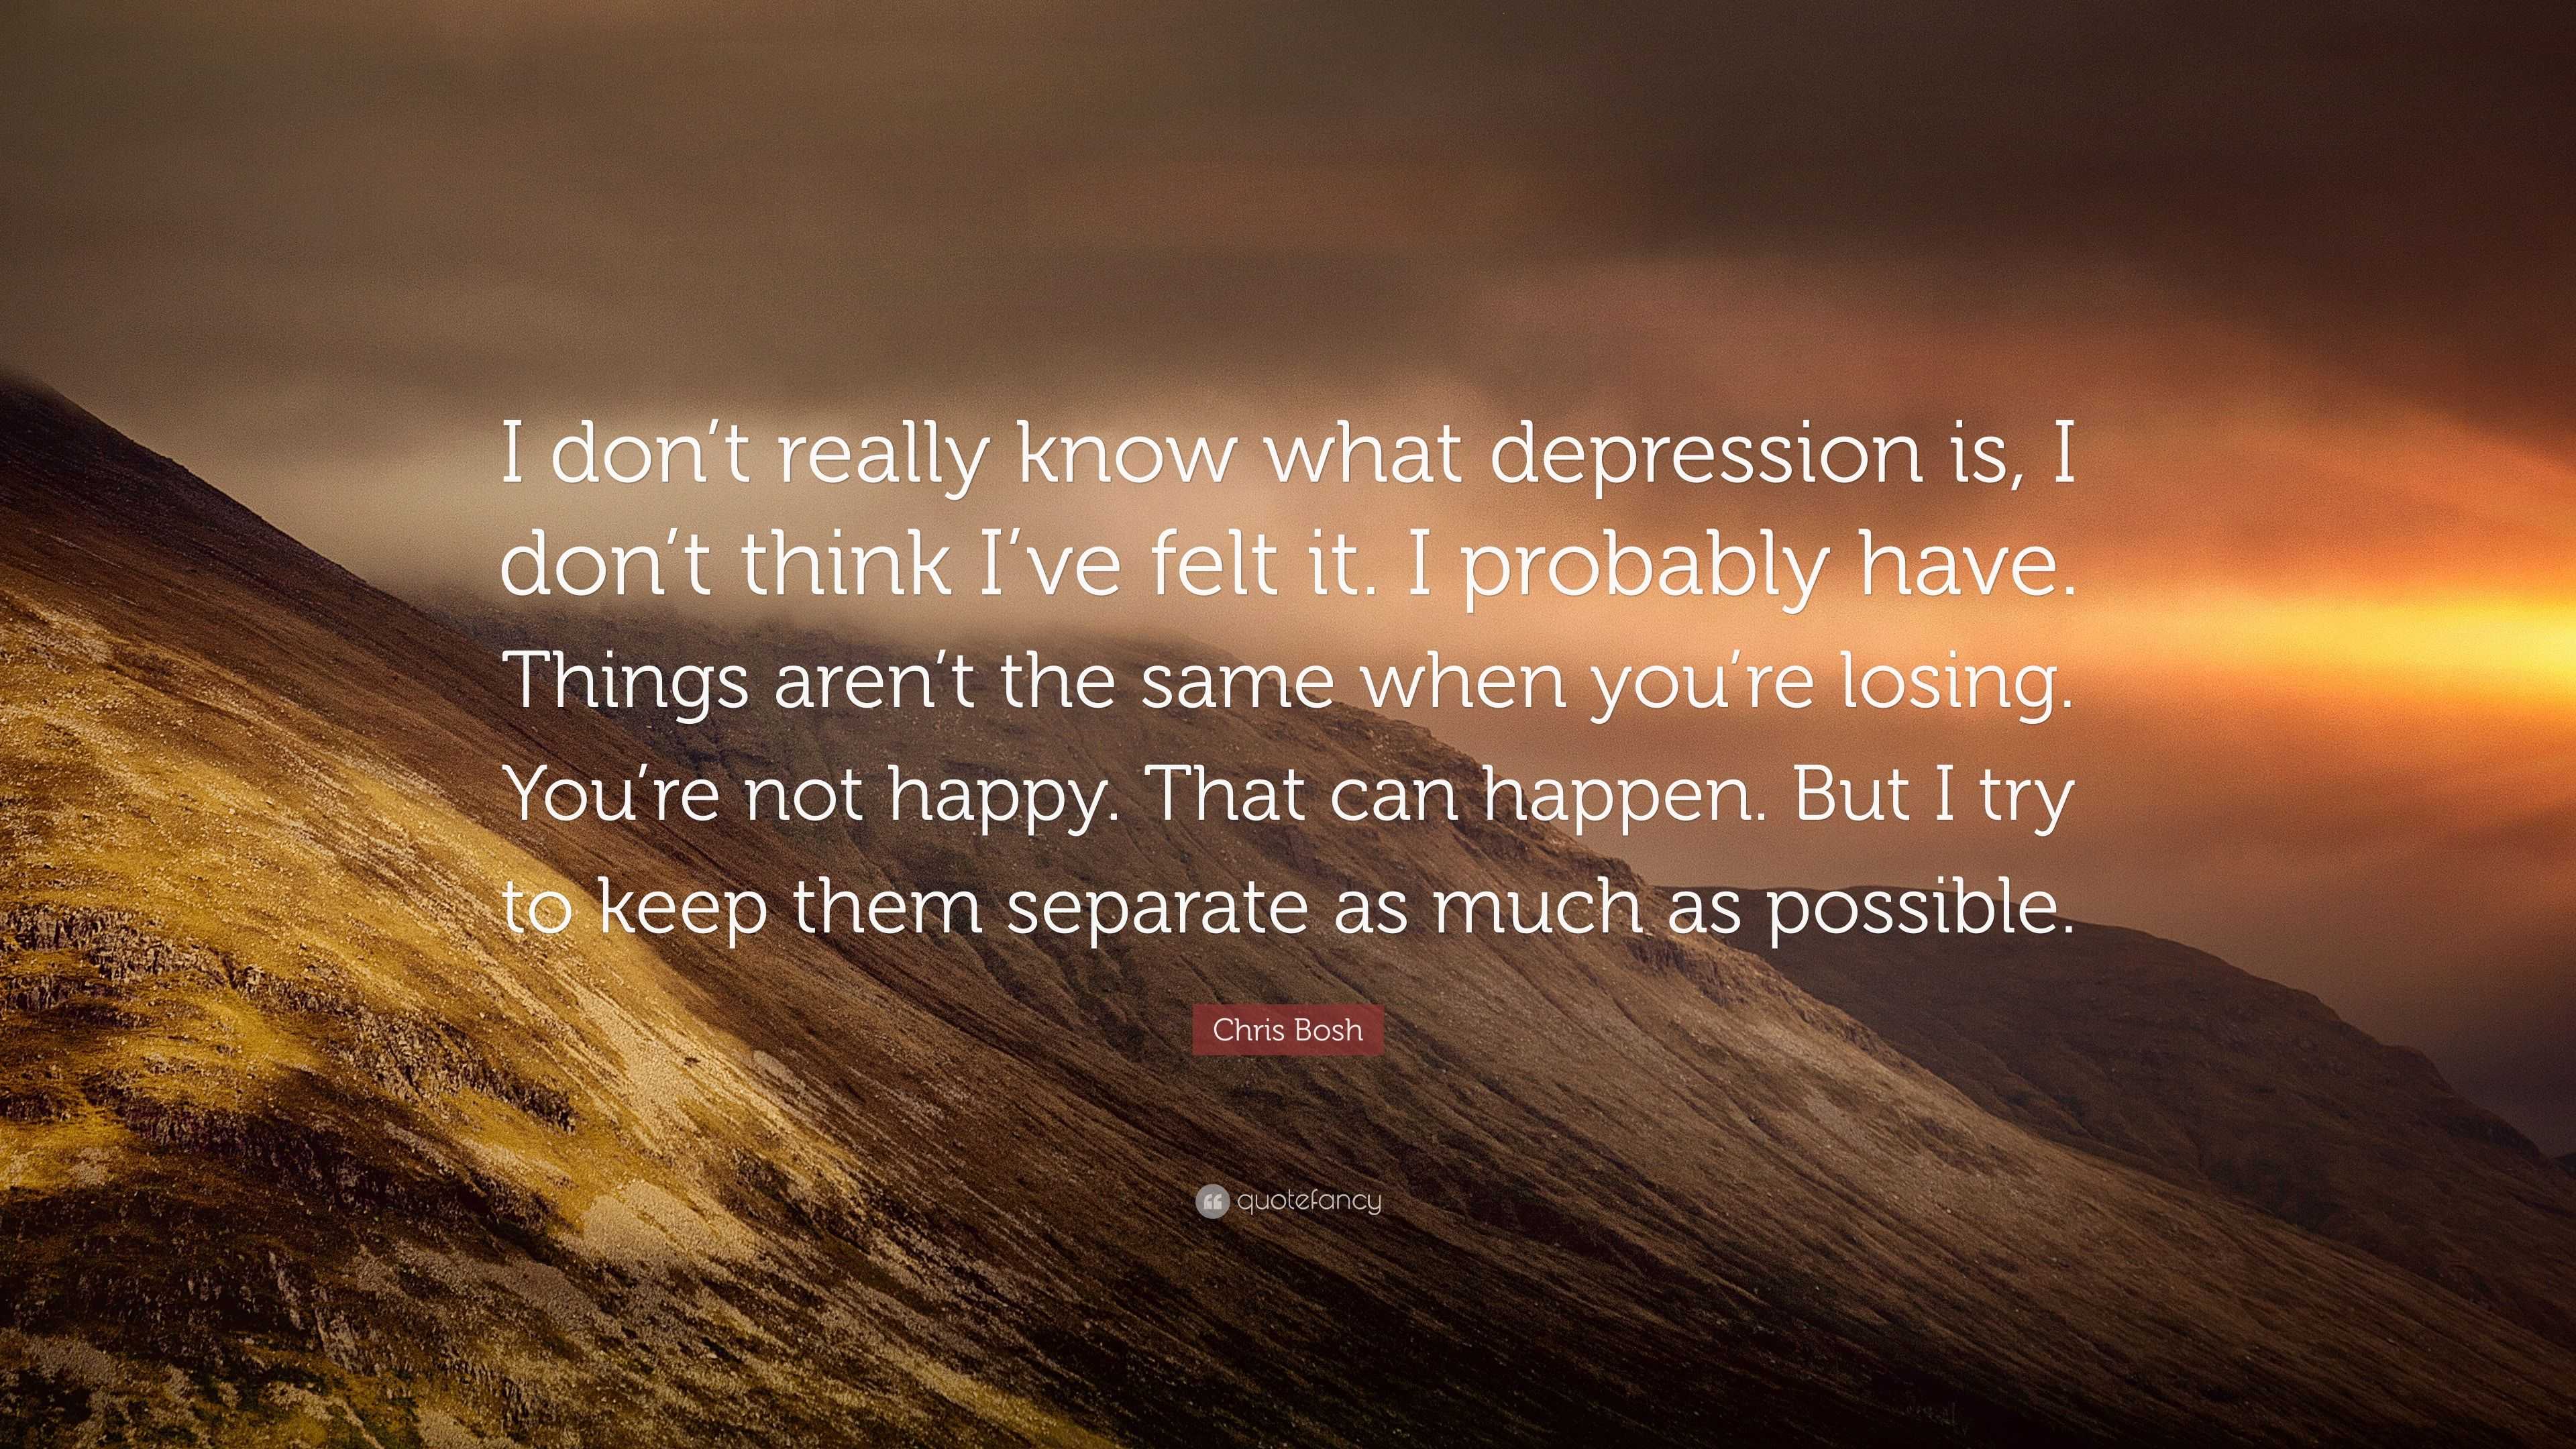 Chris Bosh Quote: “I don’t really know what depression is, I don’t ...